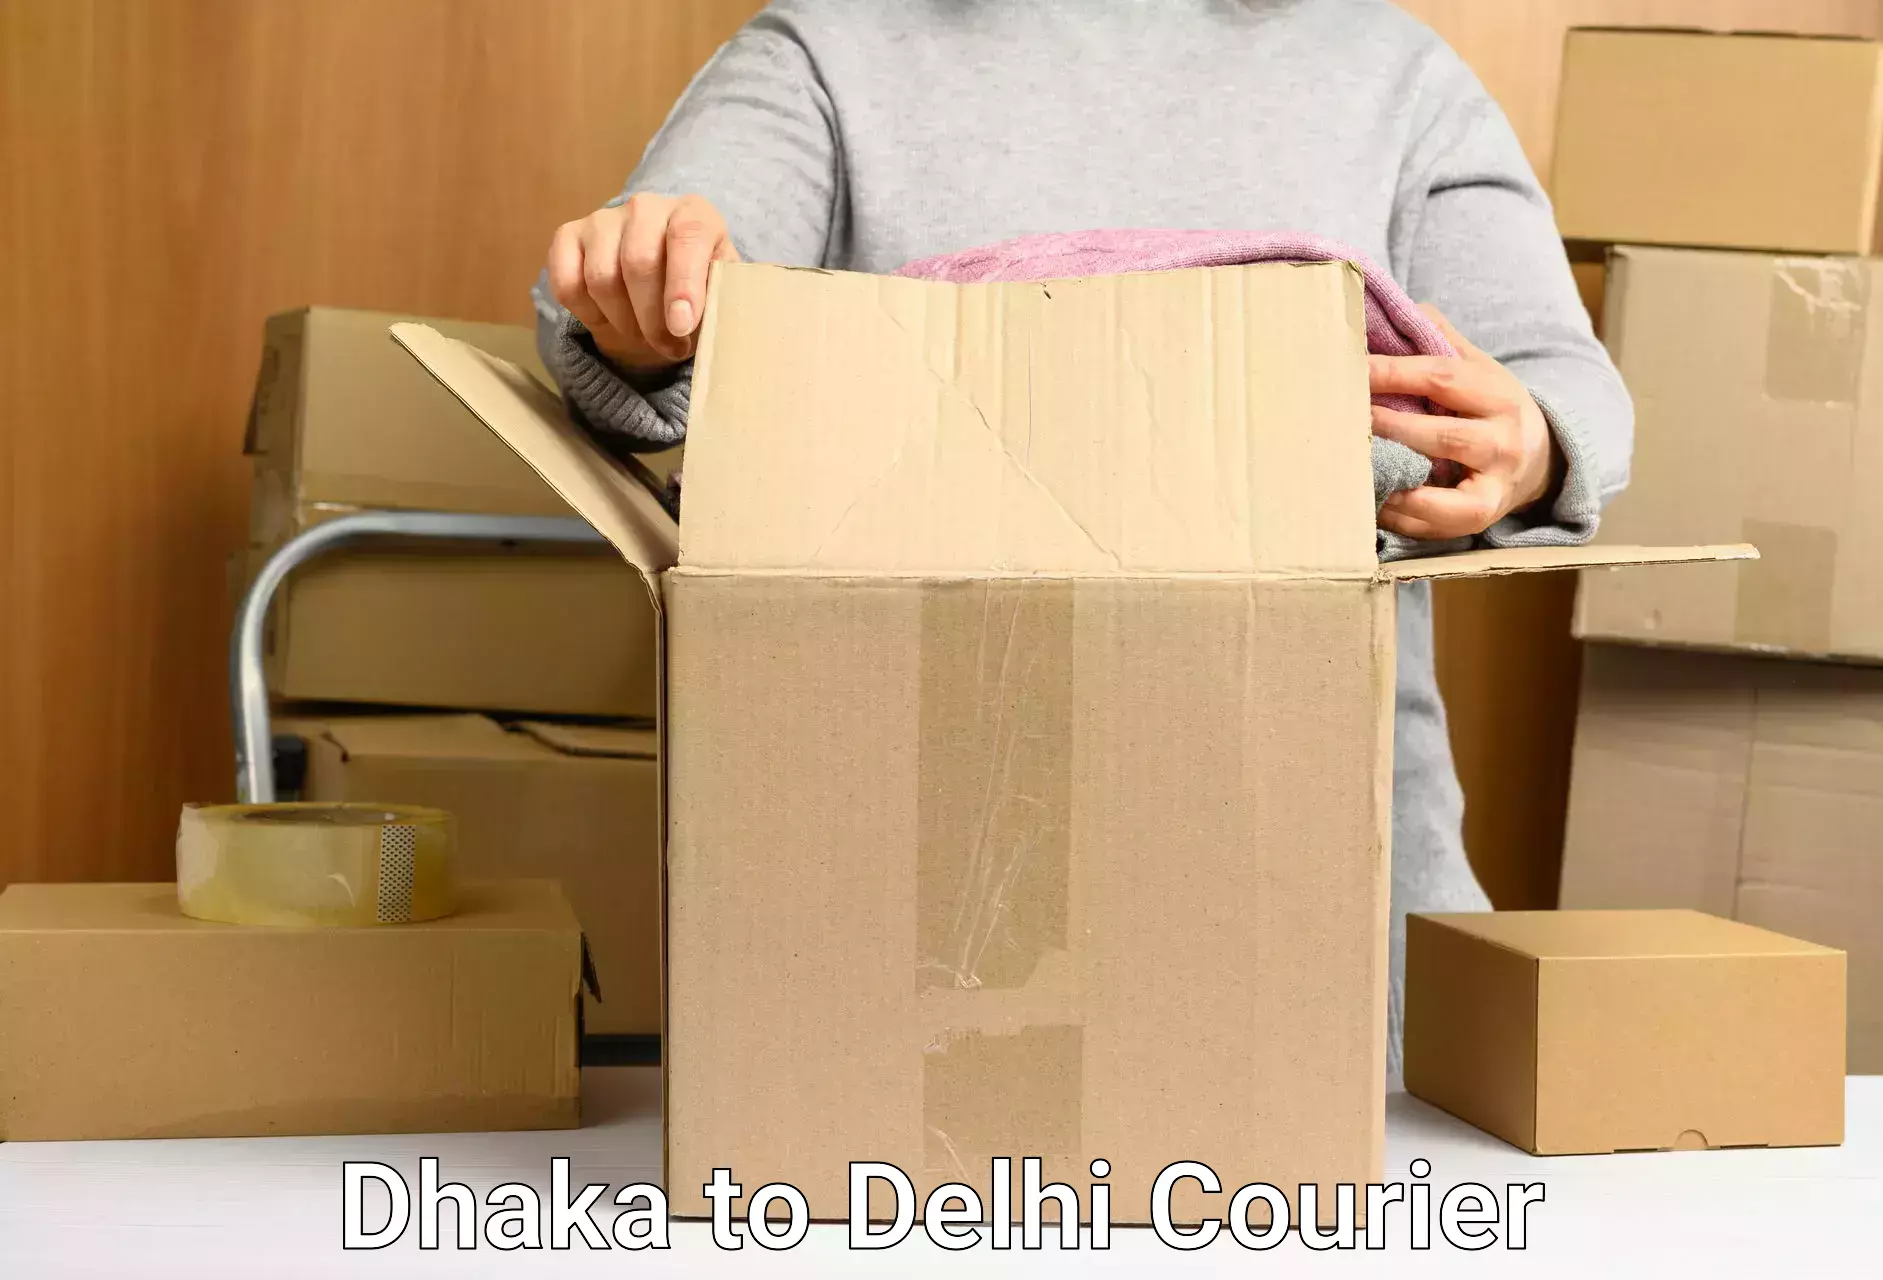 Fast shipping solutions Dhaka to NCR